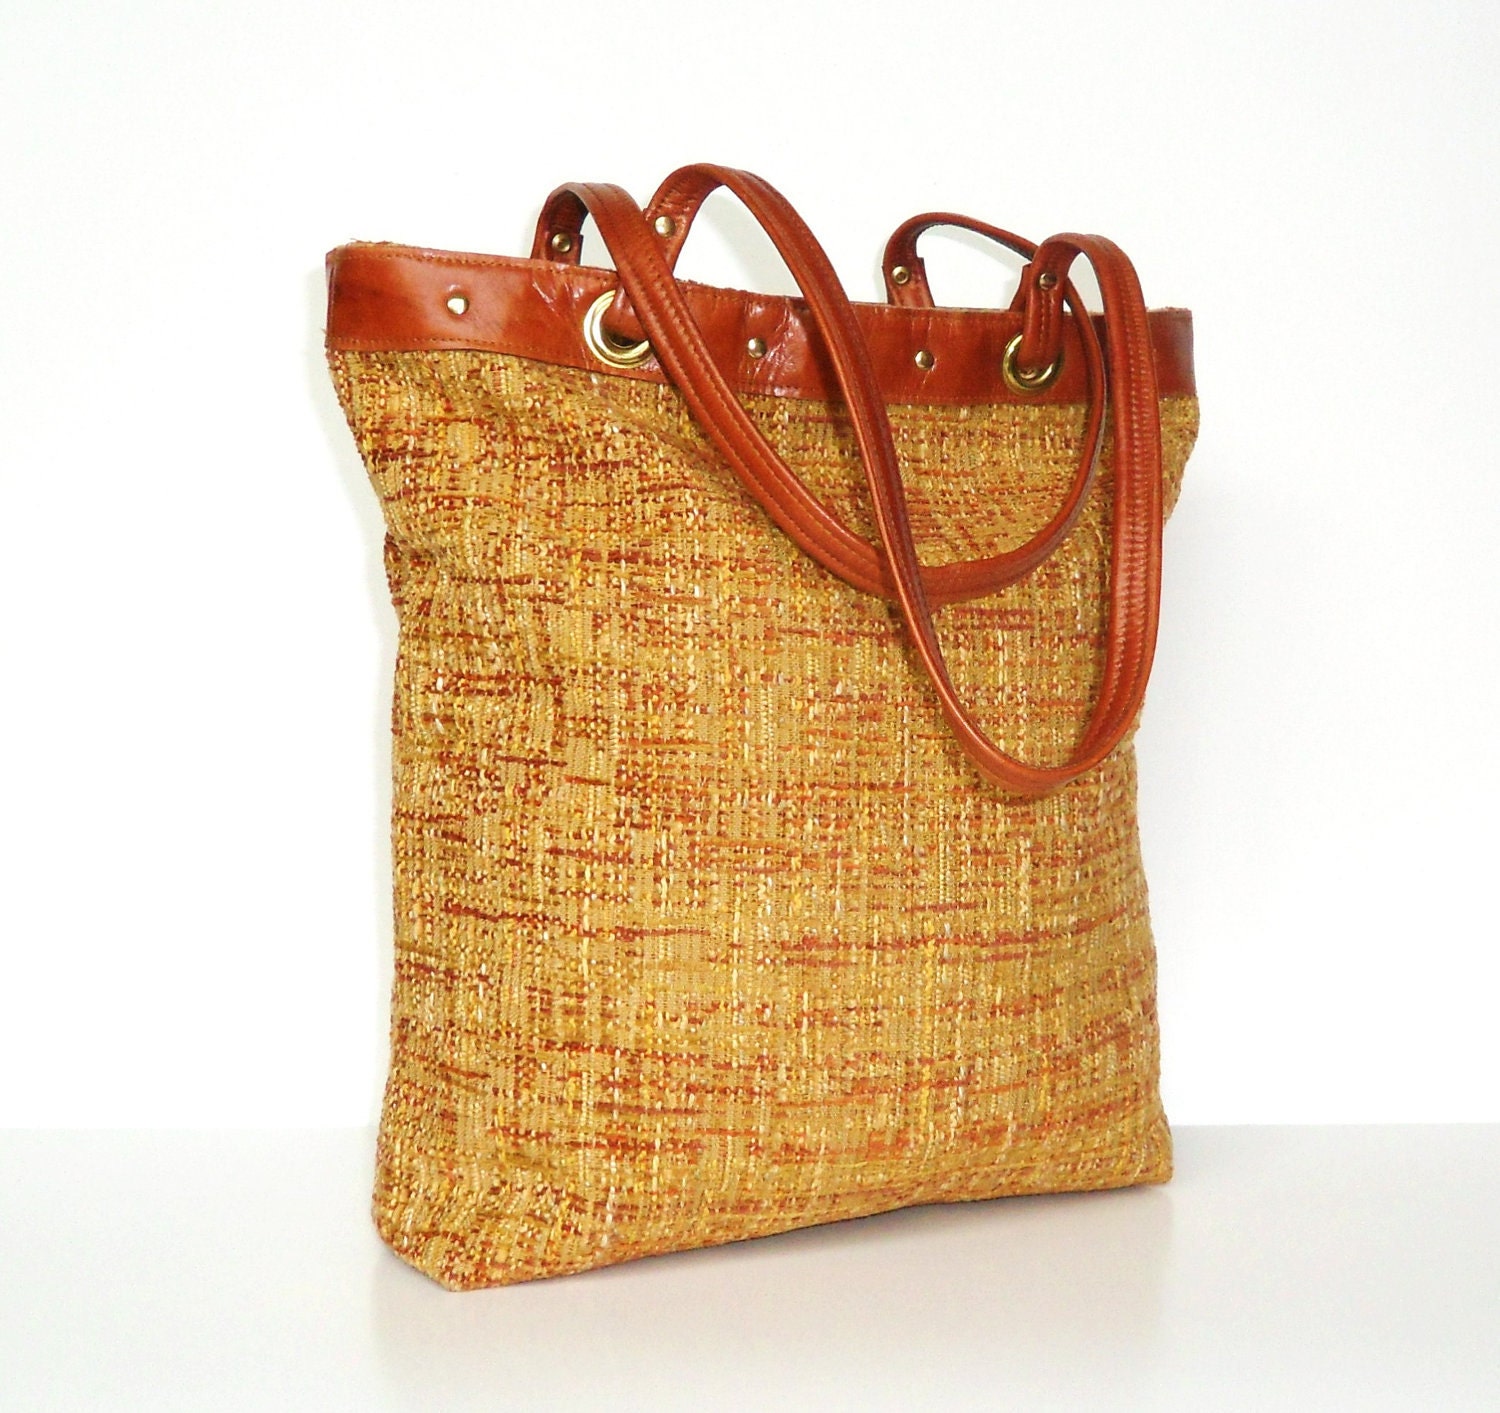 Autumn Weave Tote - Leather Trim - Pouch Style - OOAK - Ready to Ship